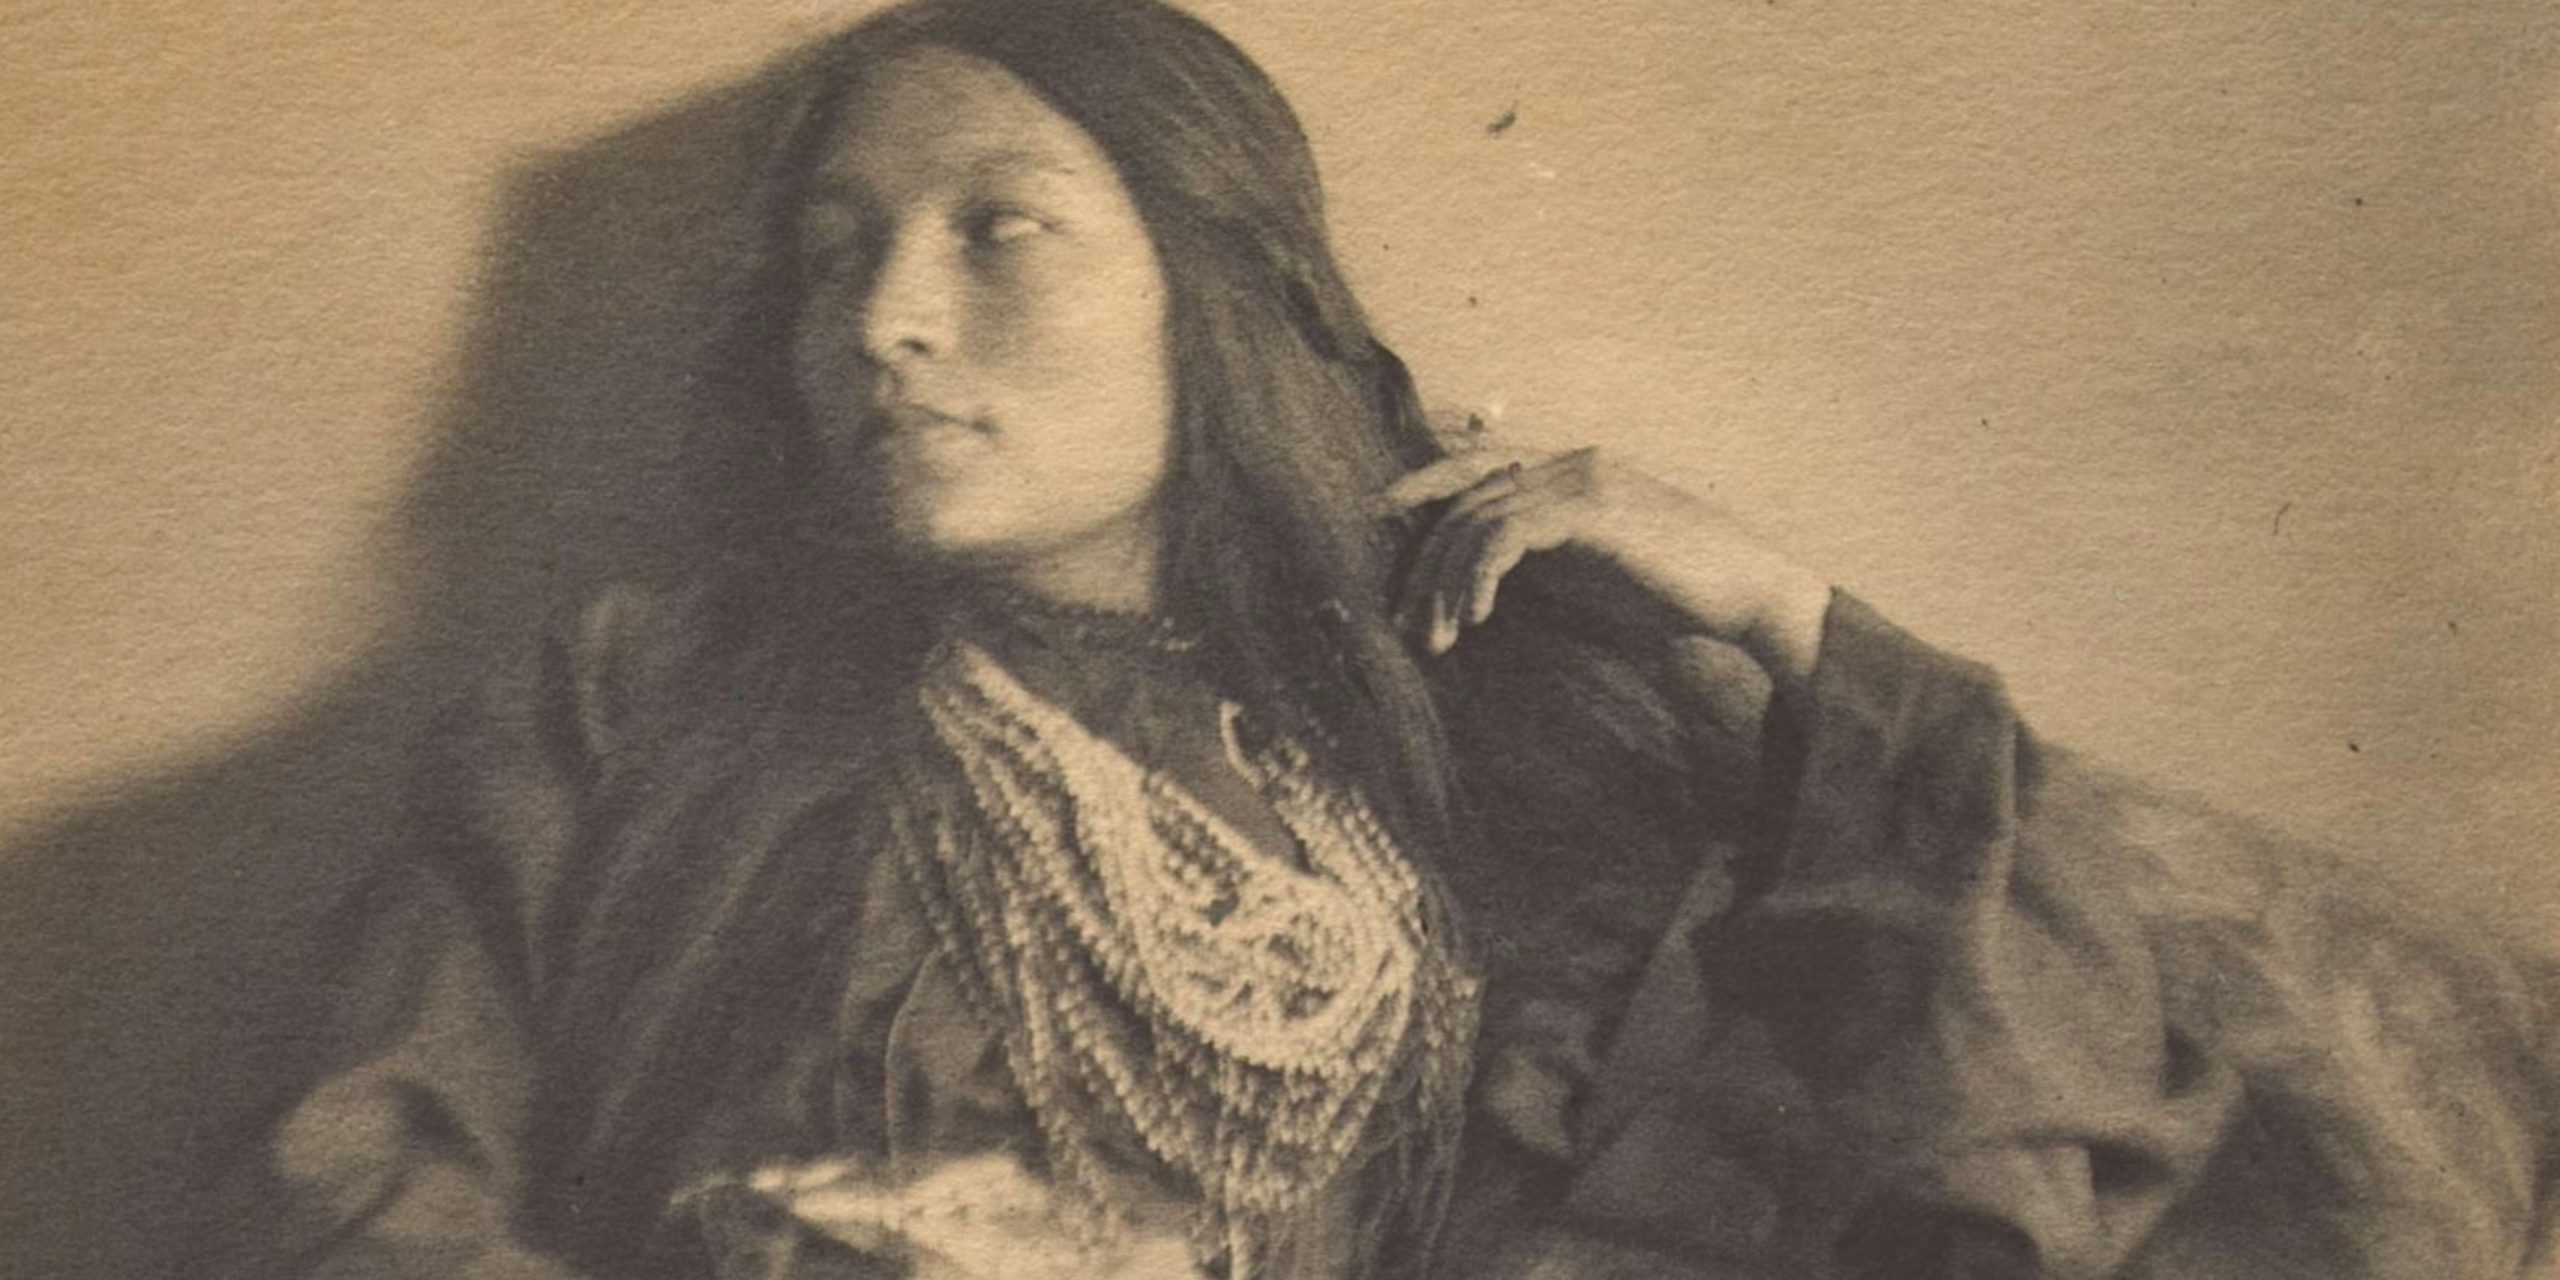 The Flight Of Red Bird The Life And Work Of Zitkala-Ša image